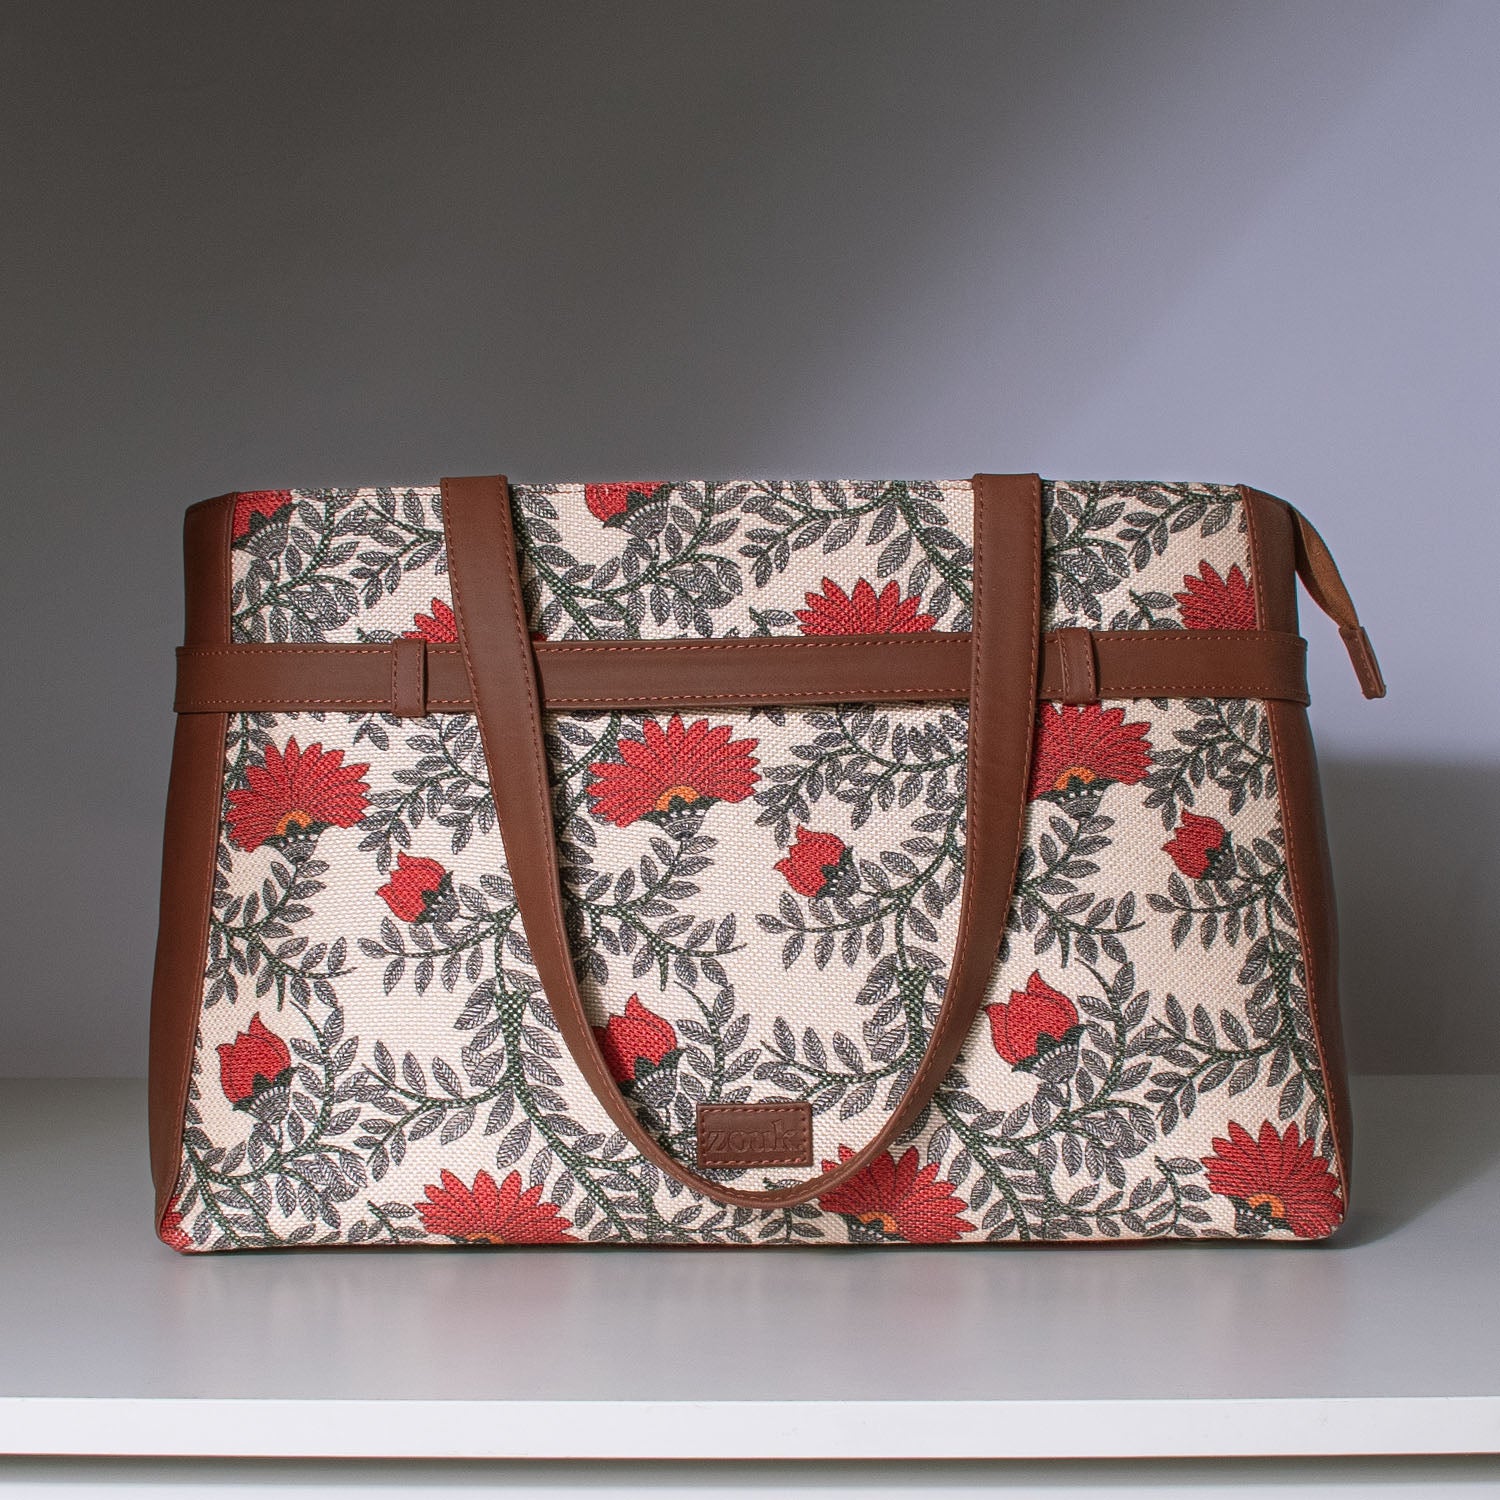 Nawabi Couture Statement Office Bag